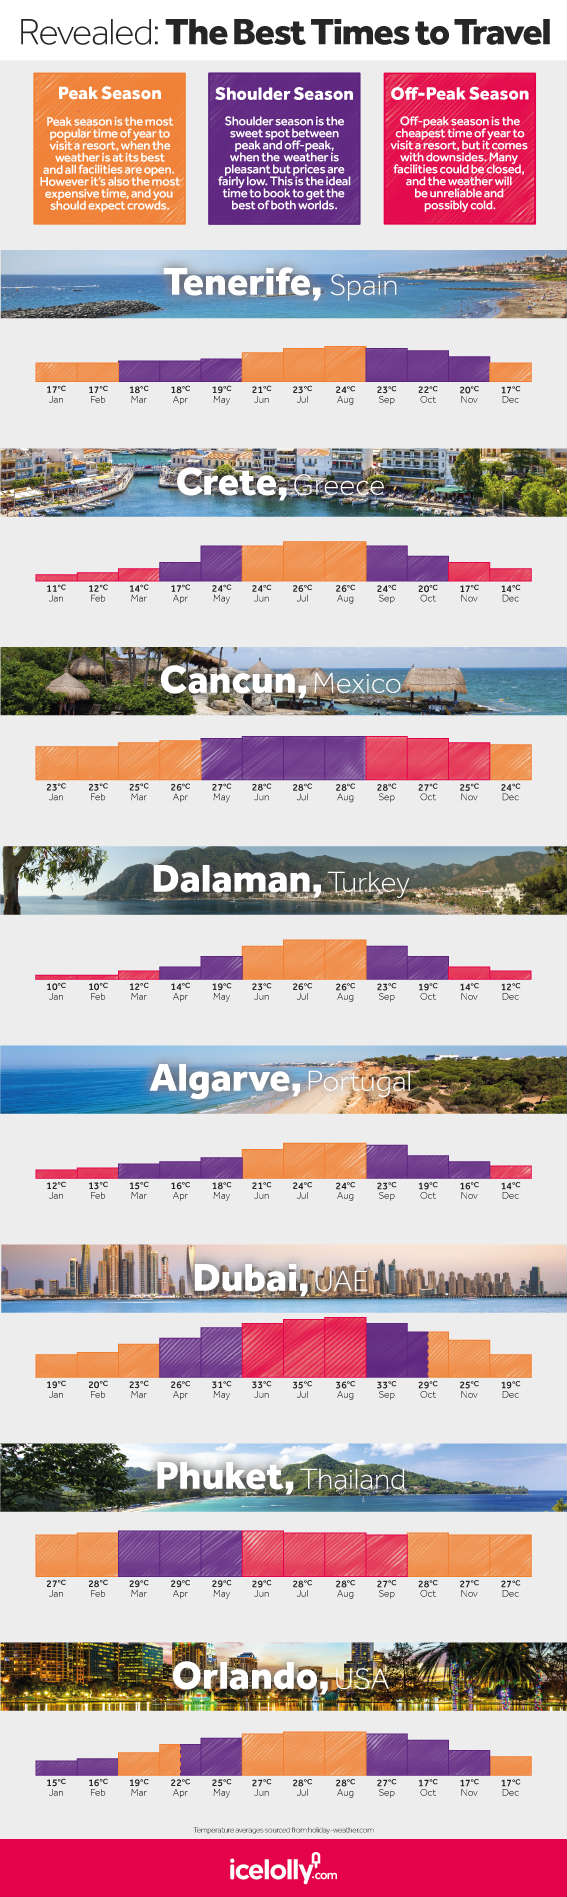 Infographic on best times to travel-shoulder seasons